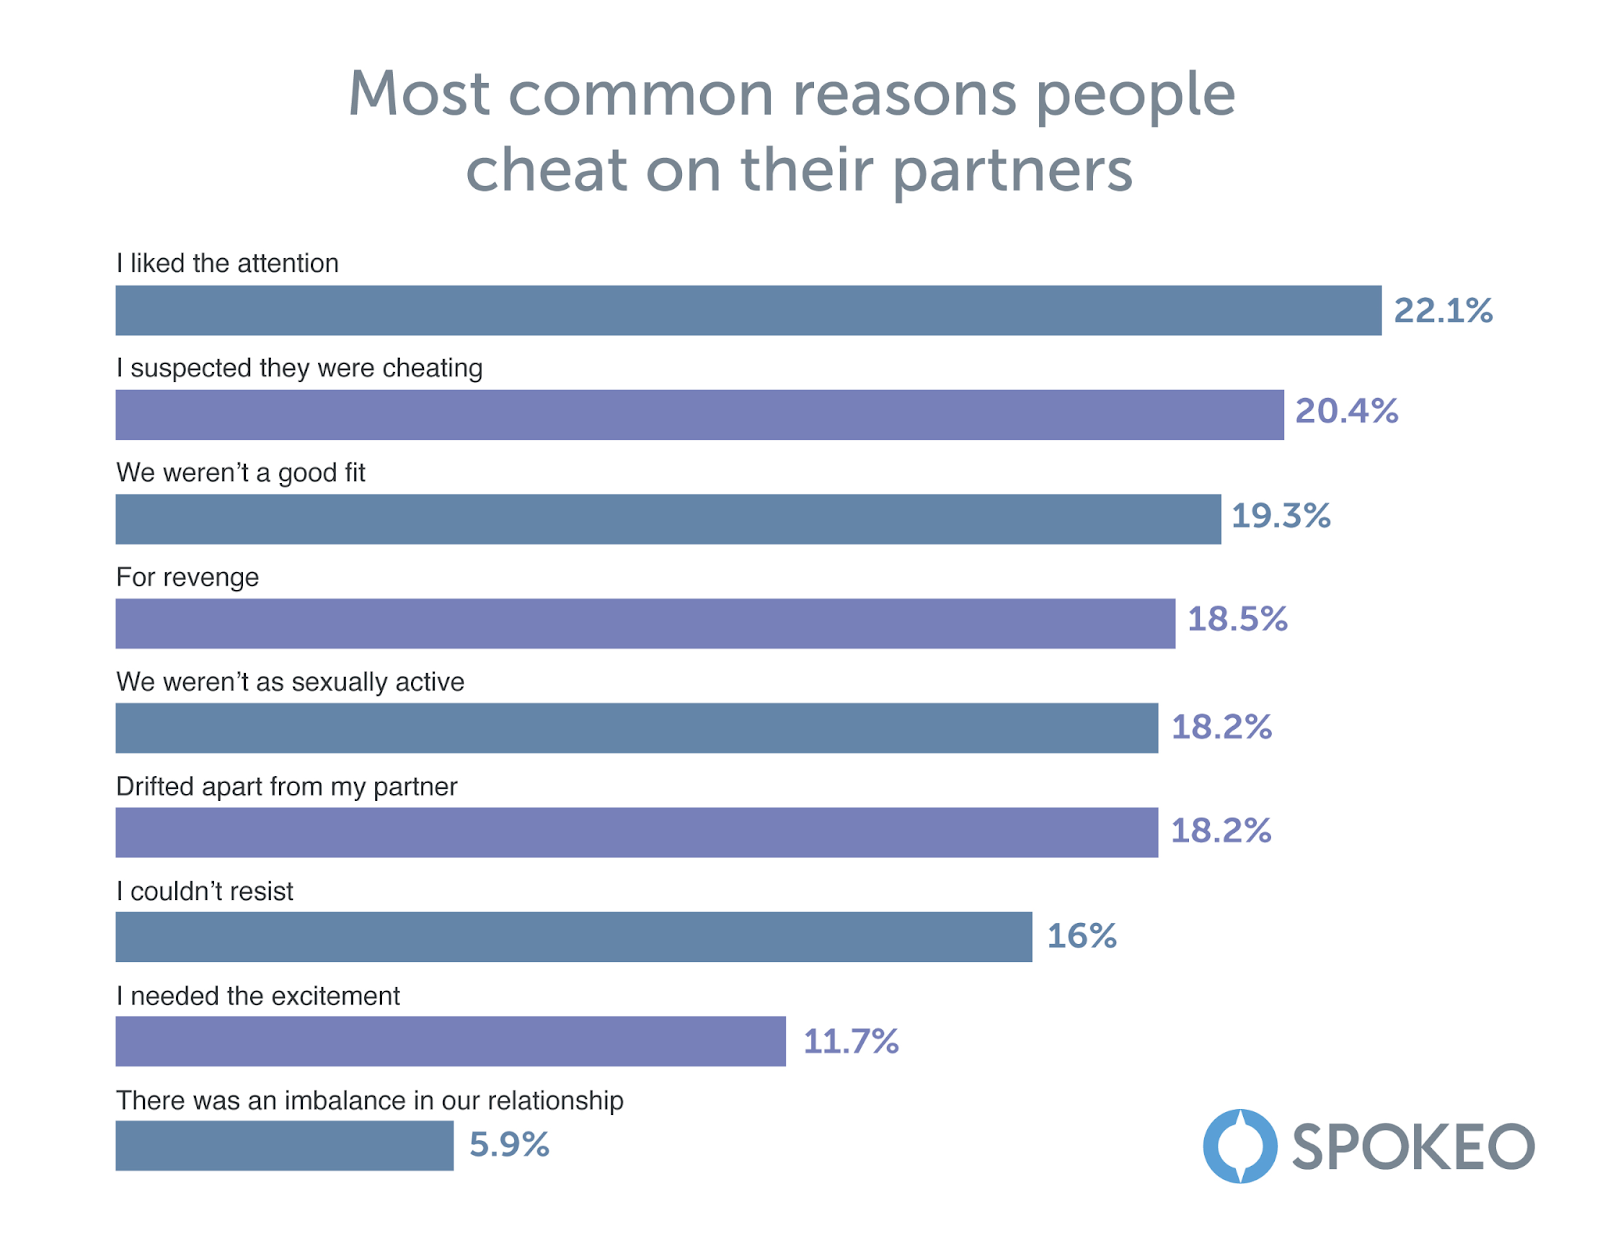 A graph chart showing results to the most common reasons people cheat on their partners.